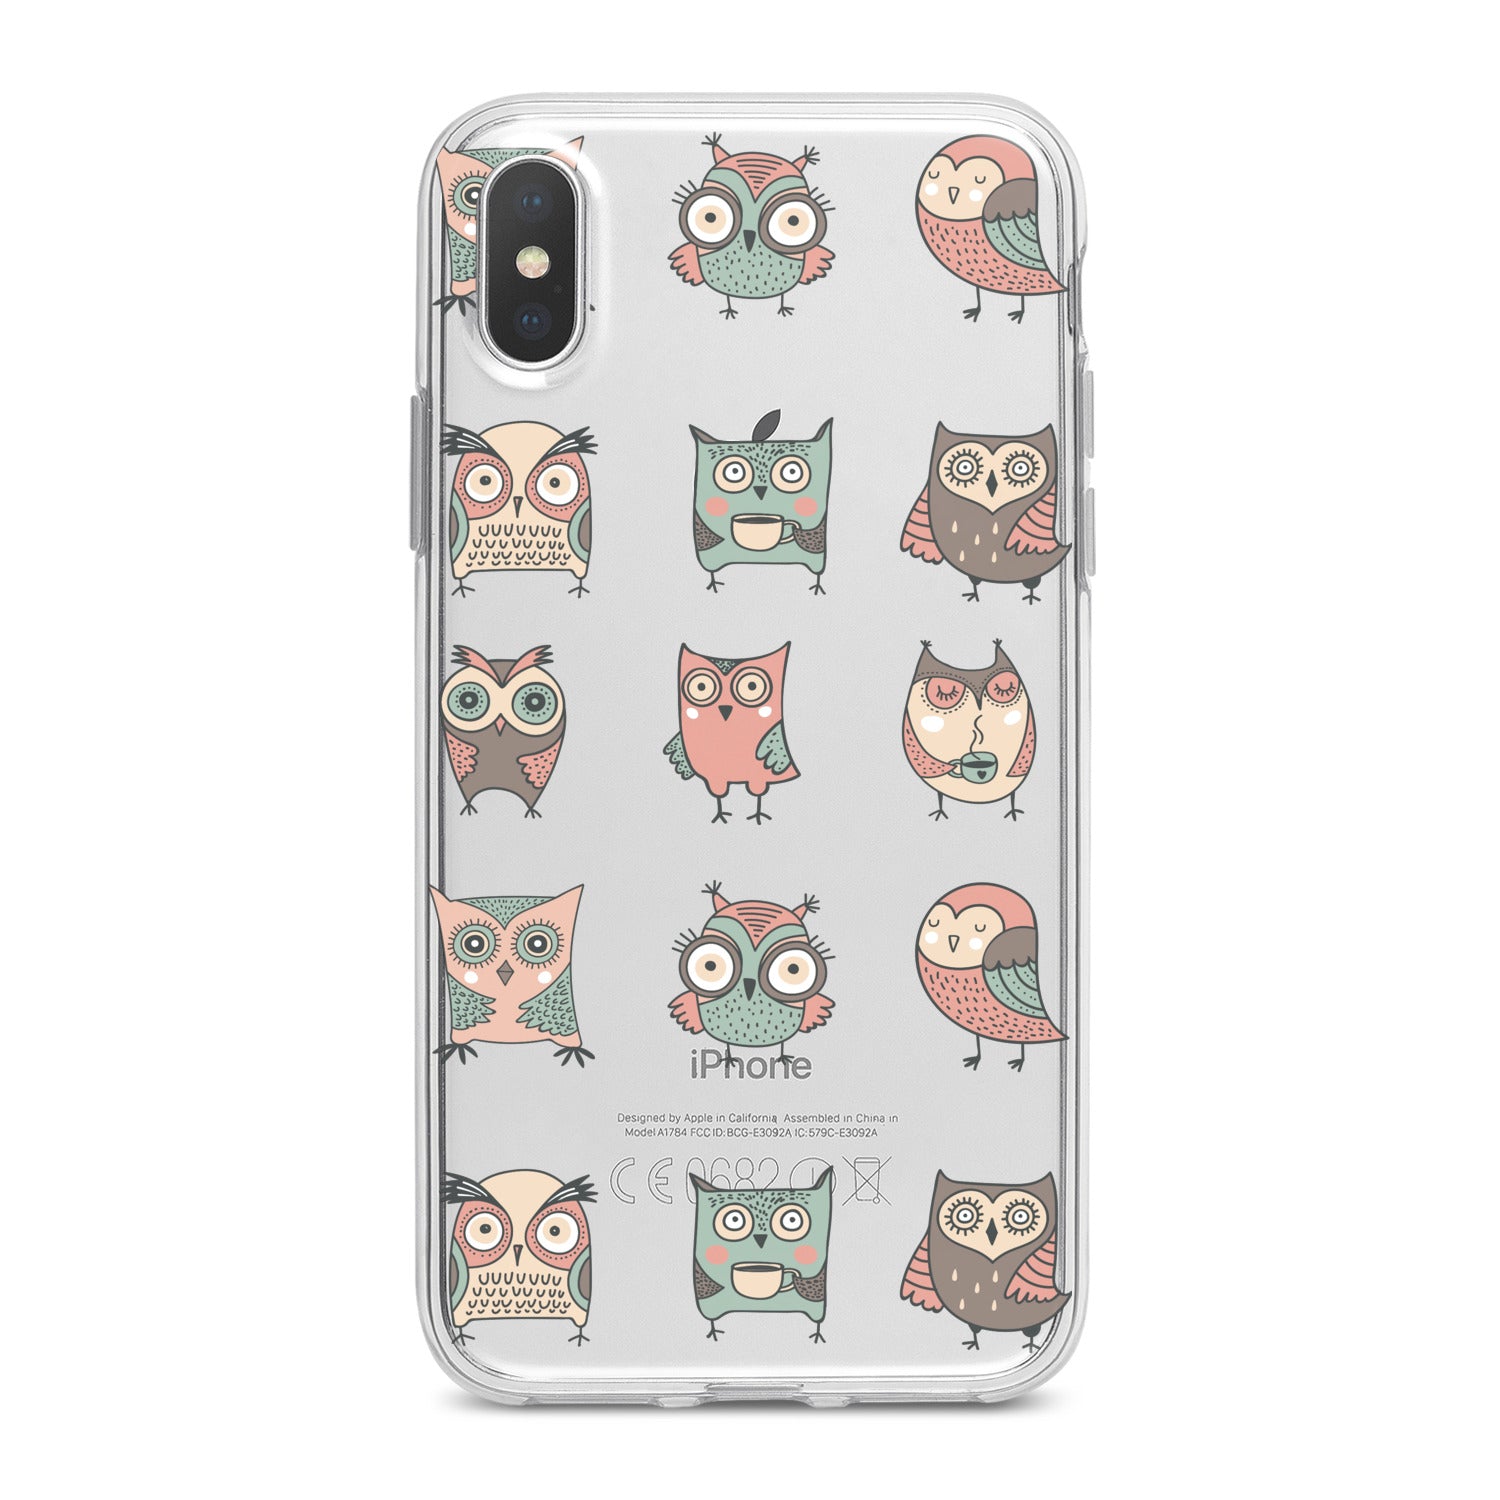 Lex Altern Adorable Owls Phone Case for your iPhone & Android phone.